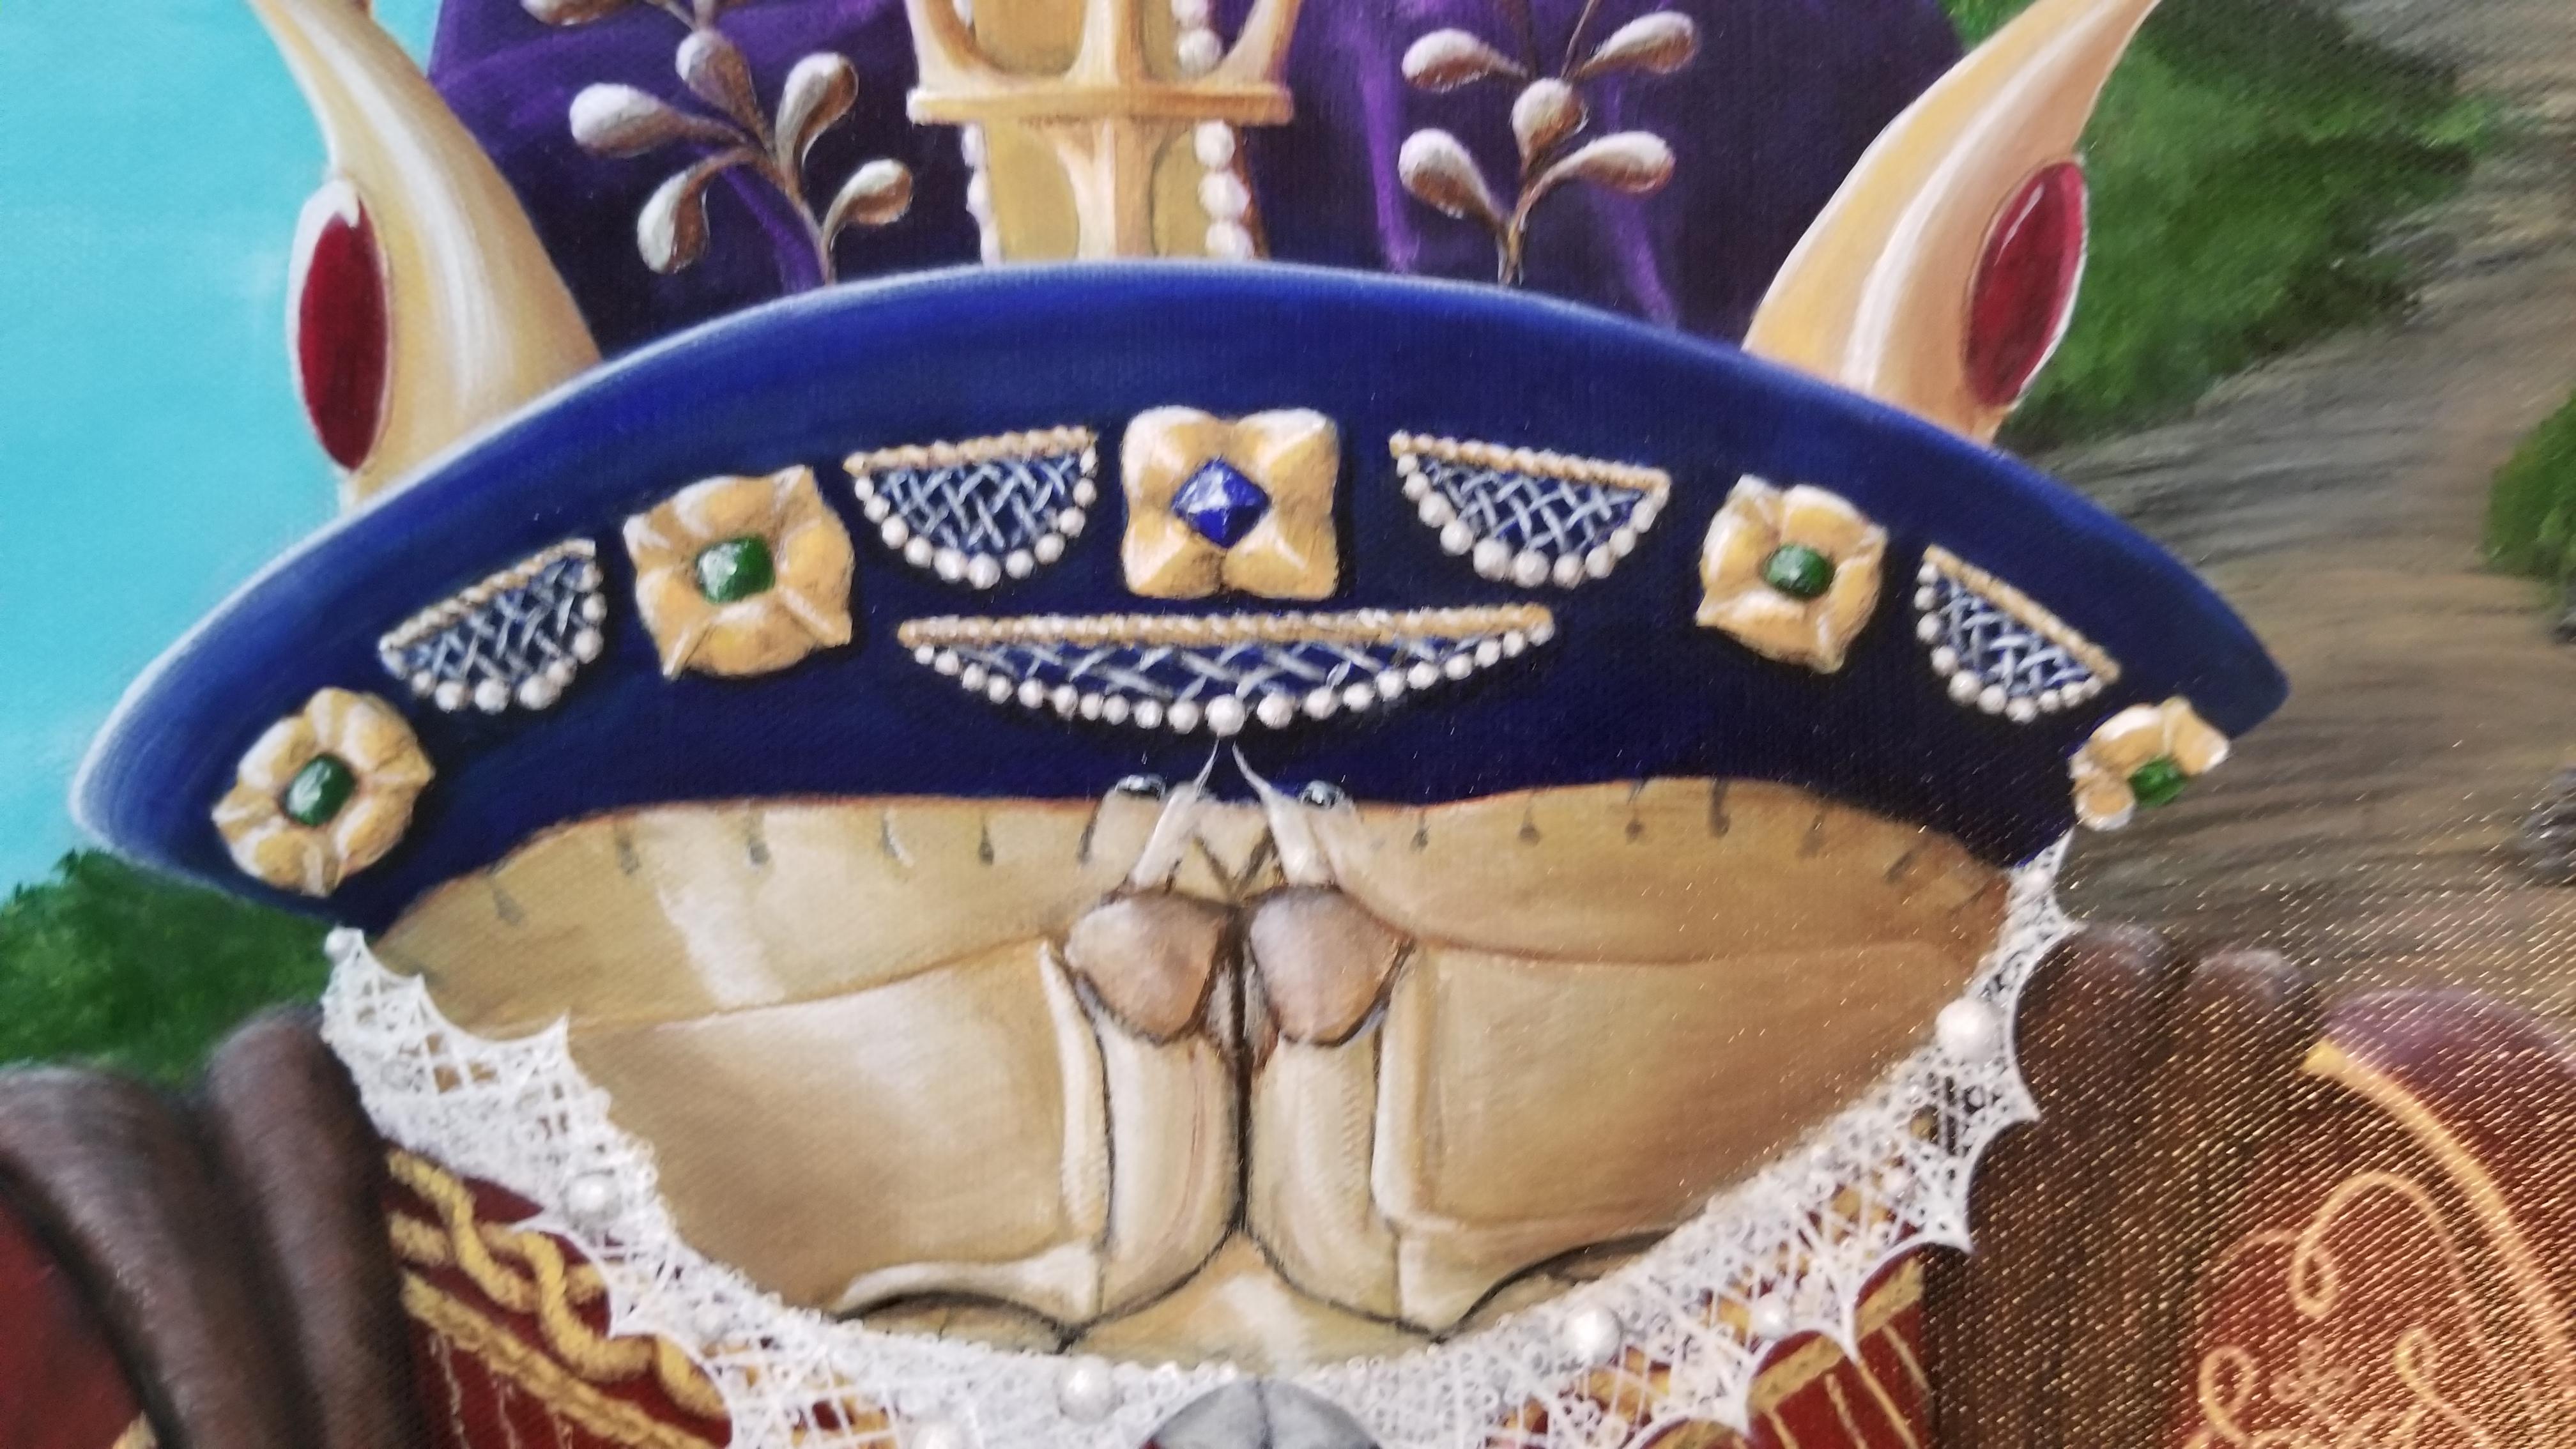 King Henry Vlll painted as a crab.
Close attention to detail.
Surreal Dark Humor
COMES ON STRETCHED CANVAS, UNFRAMED.

About the Series: “Sovereigns of the Sea.”  The series grew out of an amusing little sketch she did of a fish in a gown.  Very